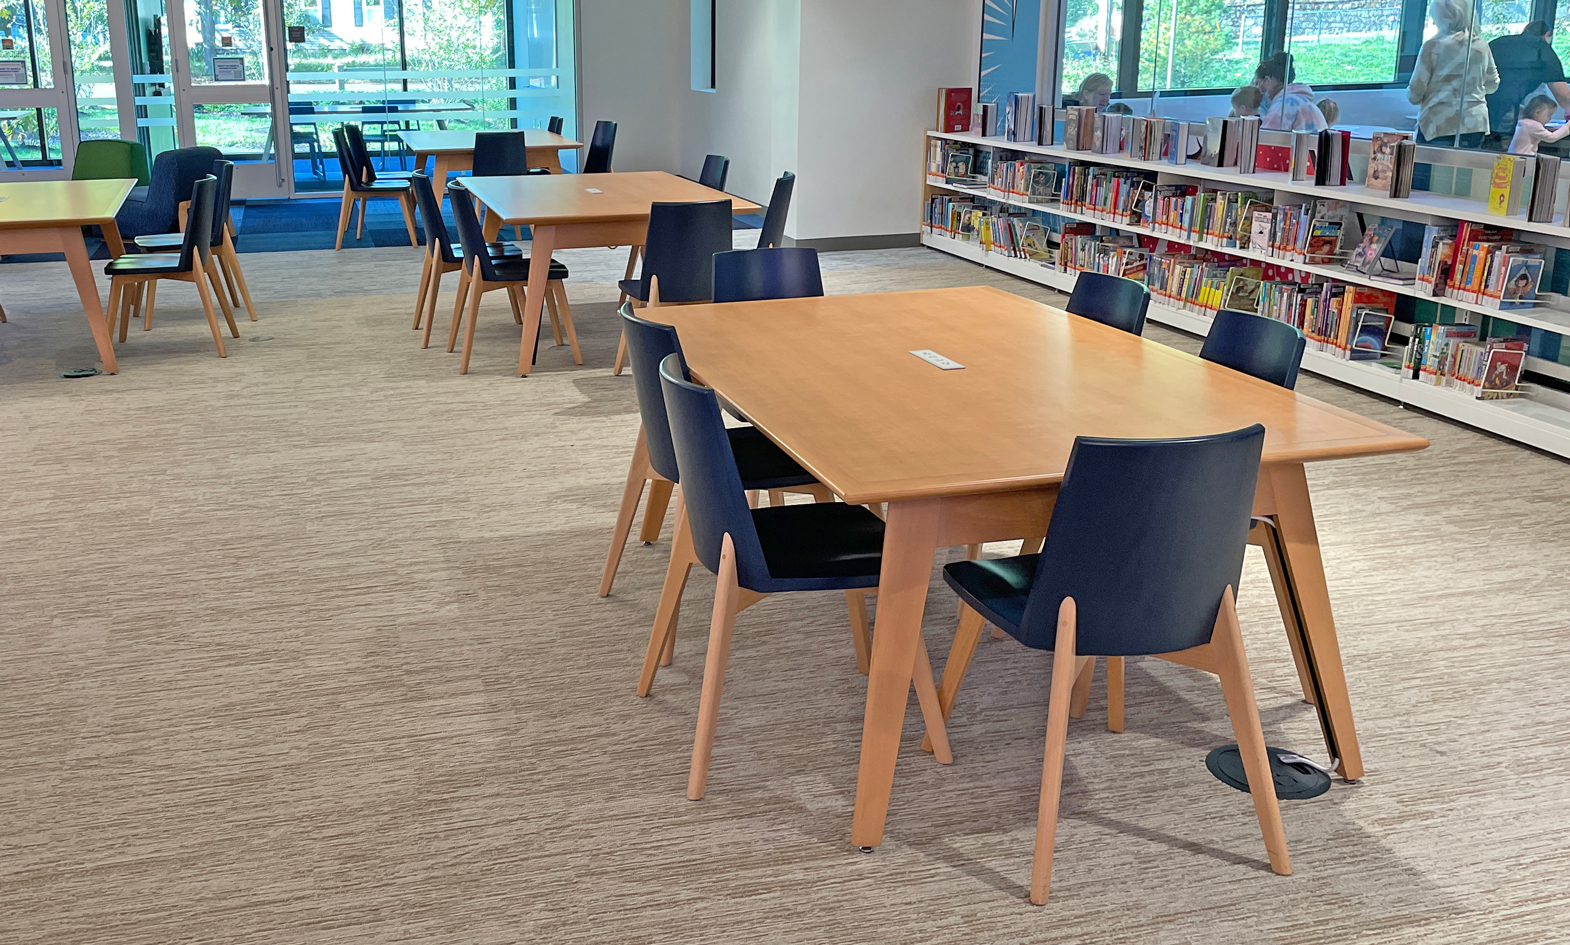 Stylish library tables and library chairs